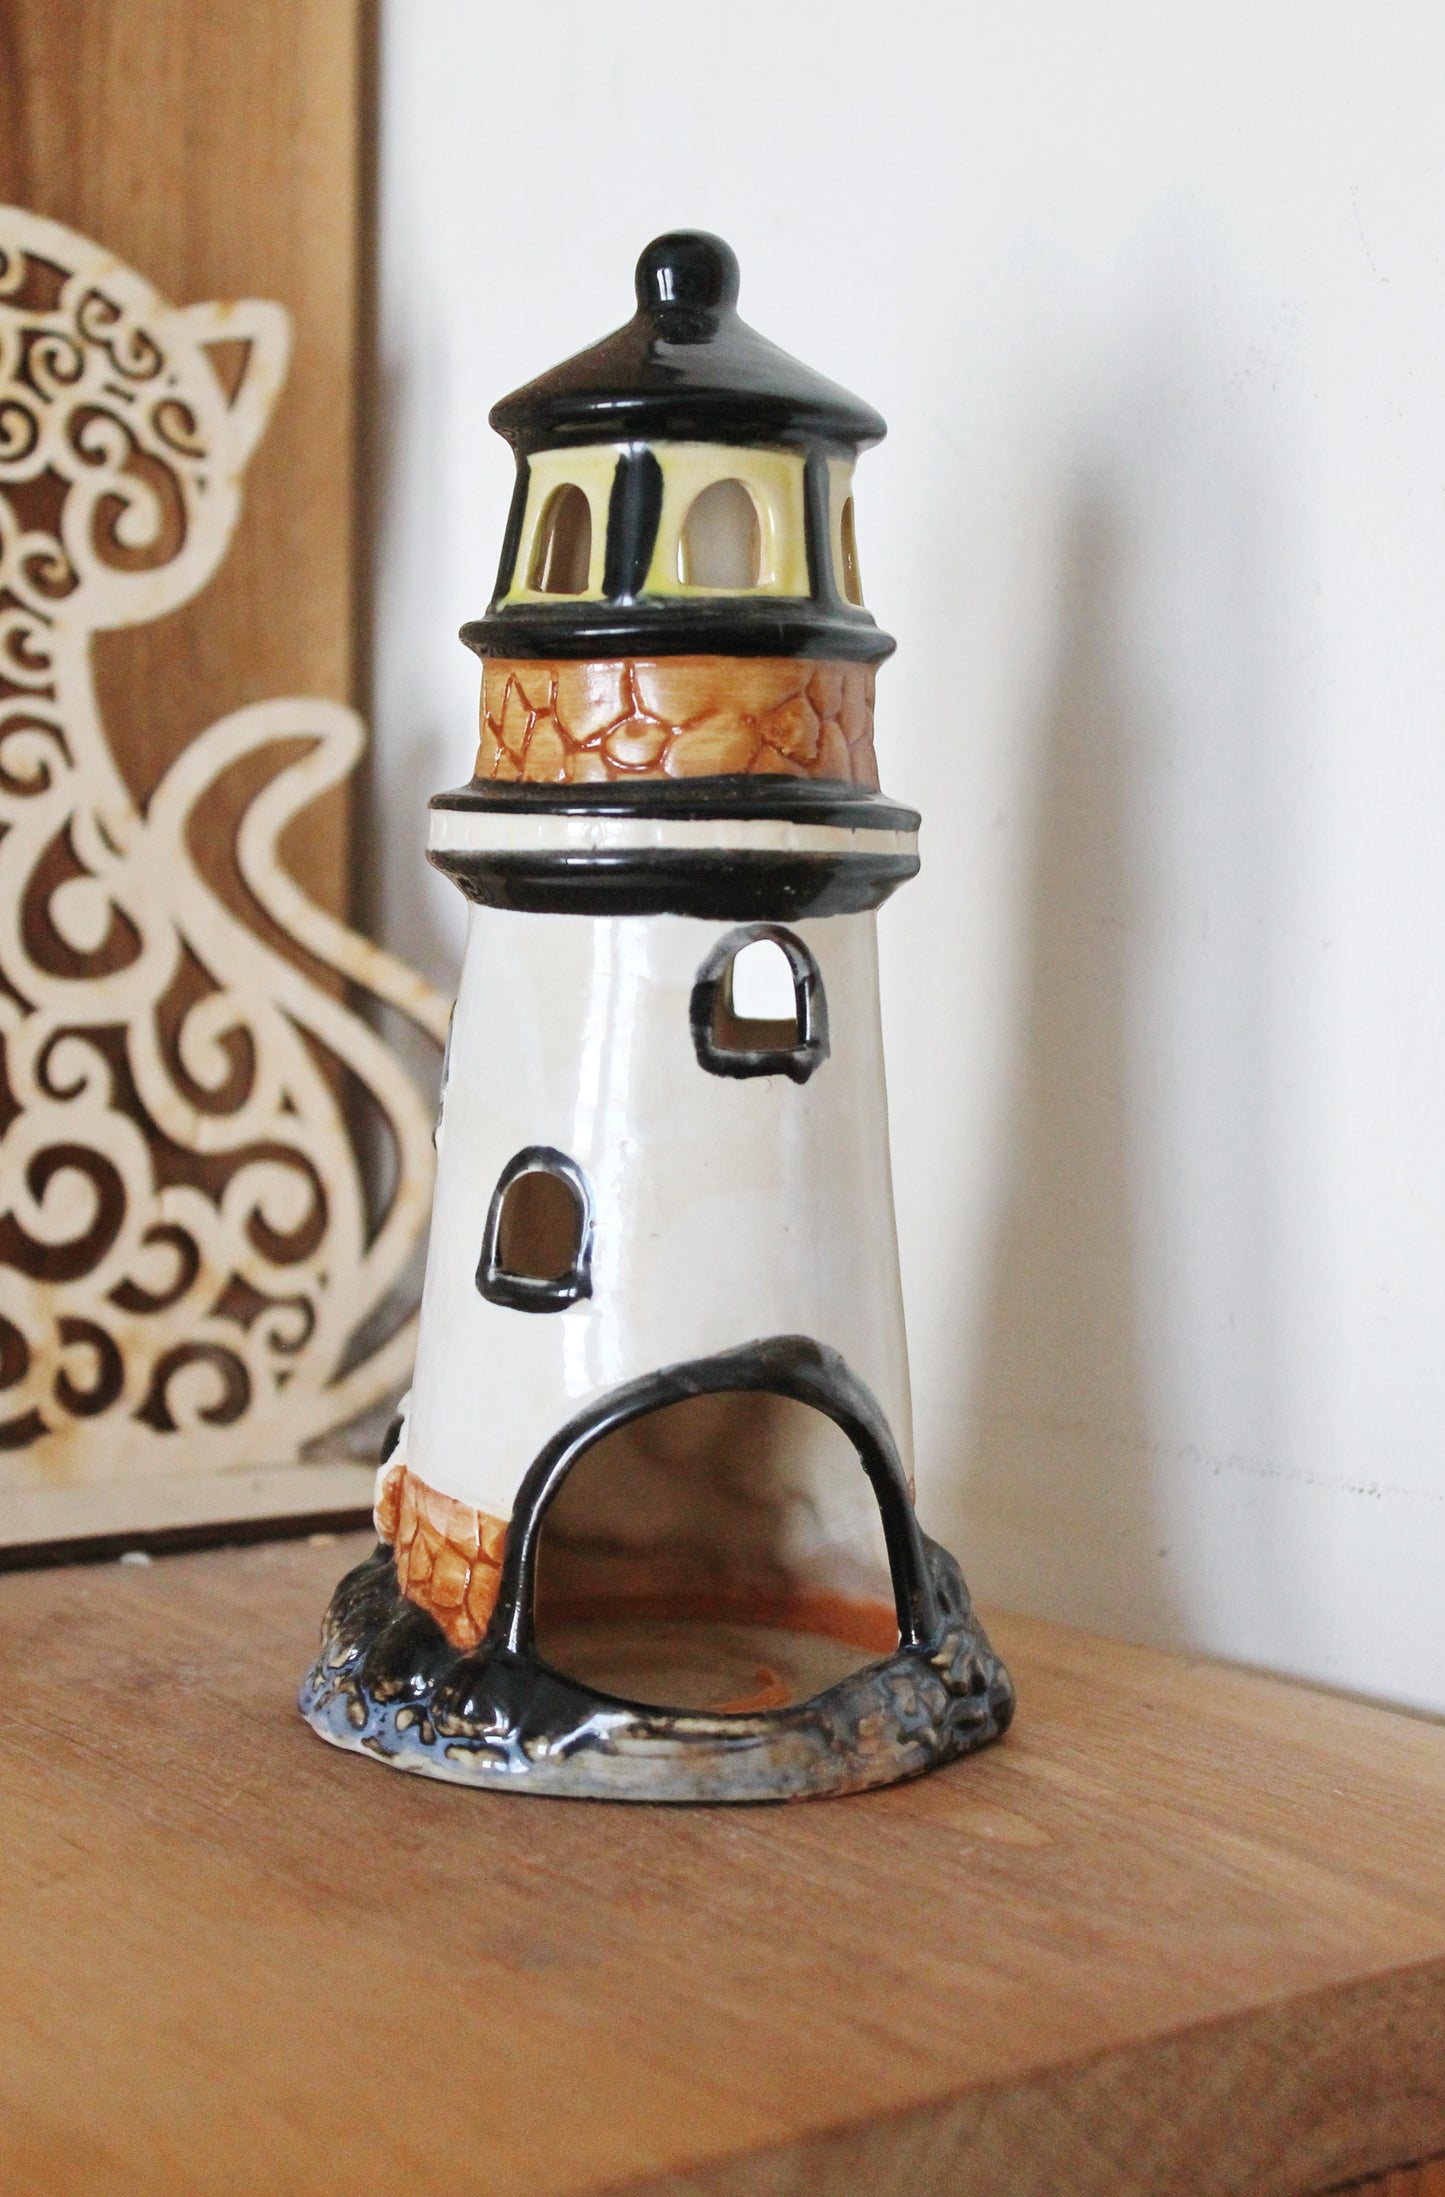 Lighthouse vintage ceramic Candle holder for one tealight candle - 7.9 inches - Germany vintage - 1990s